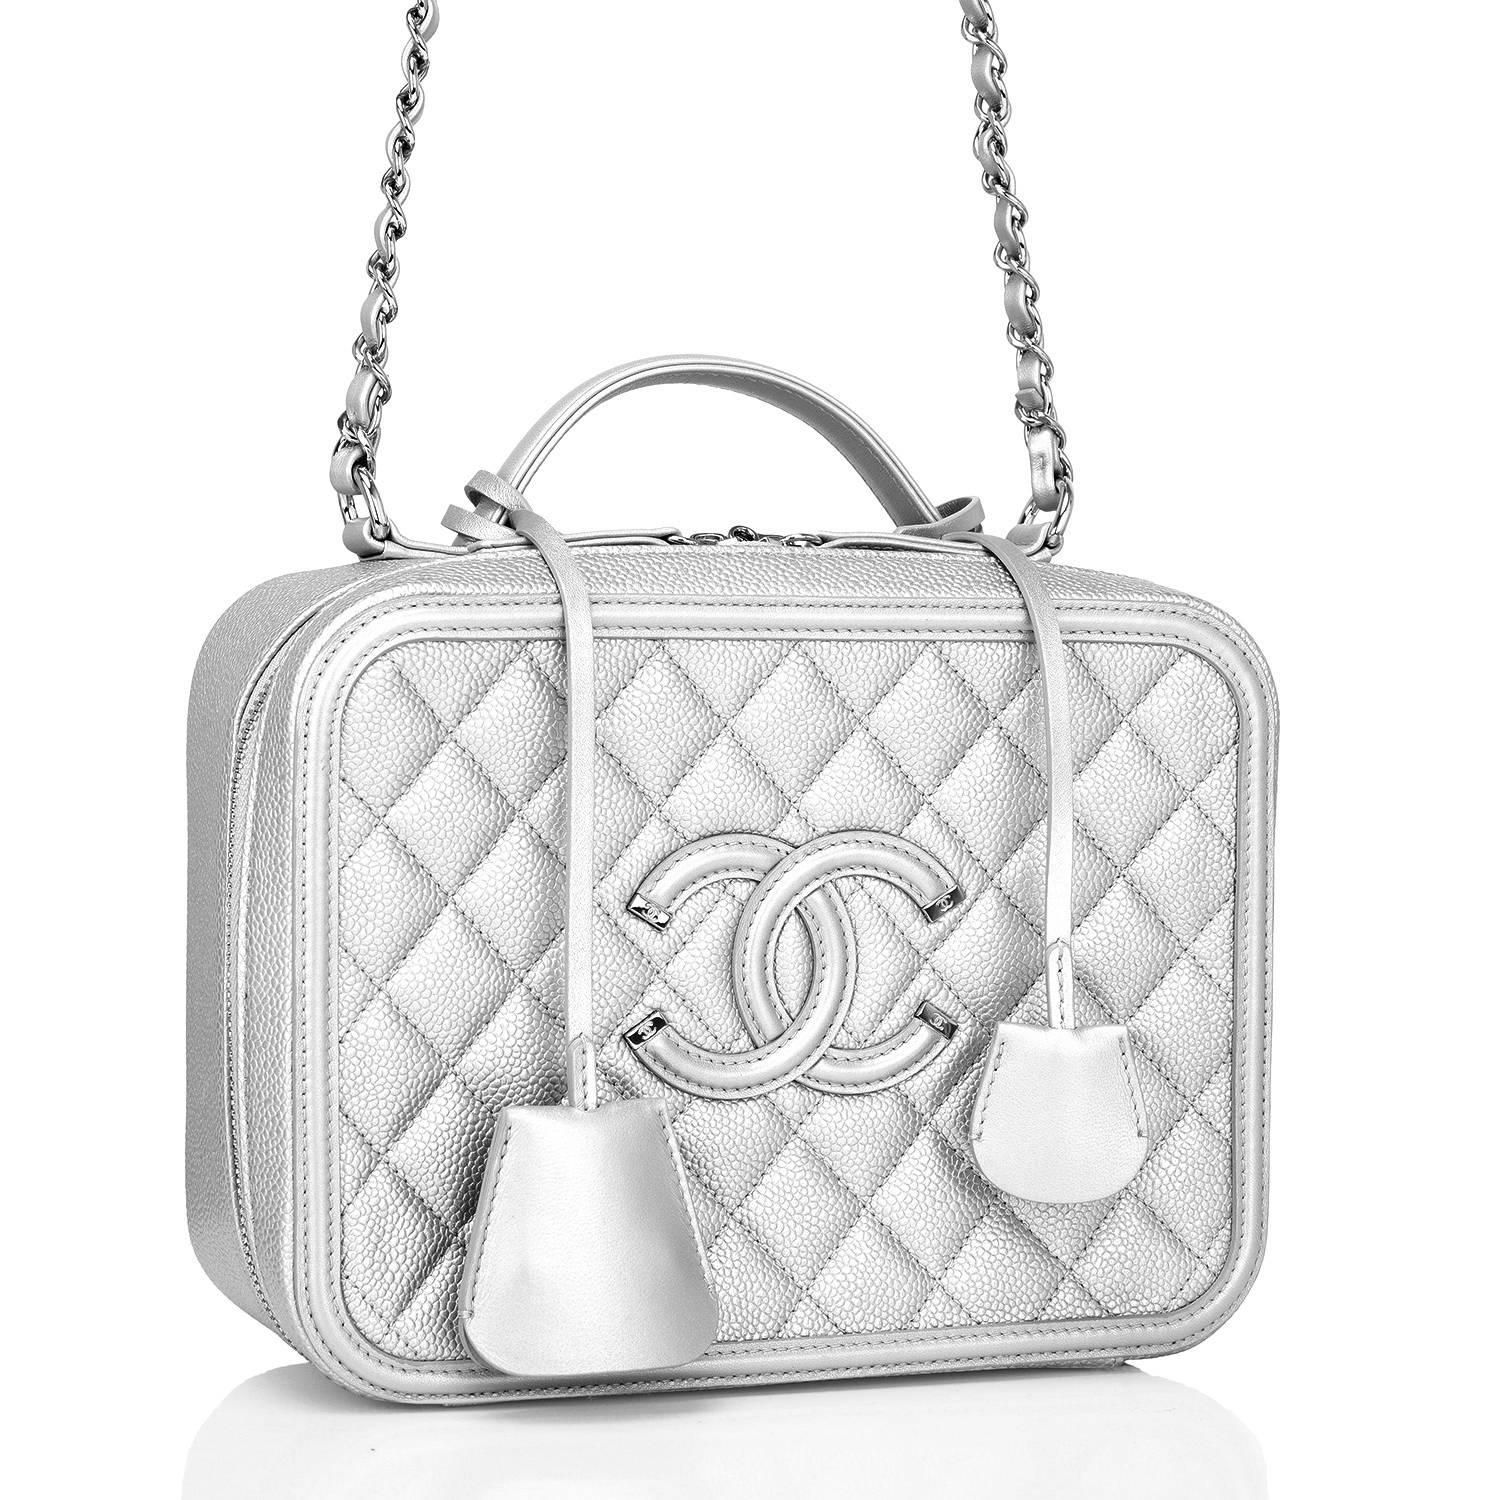 Chanel Medium Vanity Case of silver caviar leather with silver tone hardware.

This bag features Chanel's signature CC logo stitch in on the front, a silver tone CC lock with a clochette, a matching key with another clochette, zip around closure,